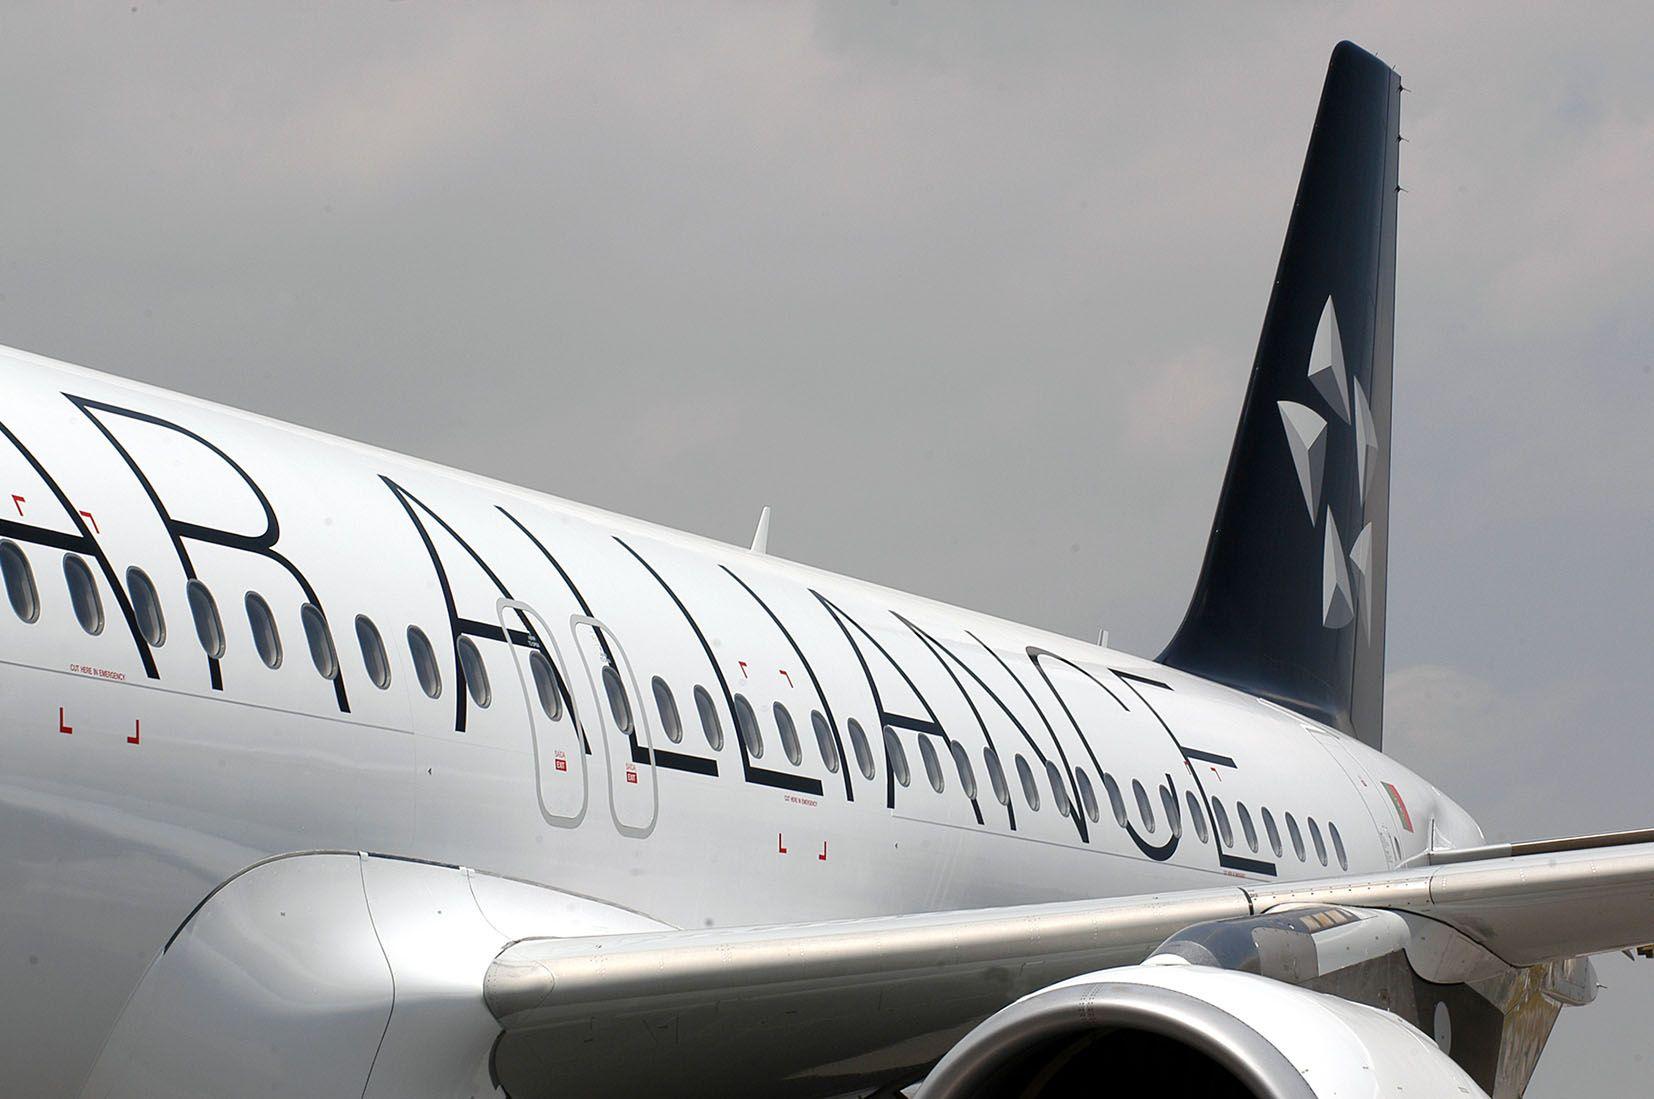 United Star Alliance Logo - Lufthansa and United debut new digital services platform that will